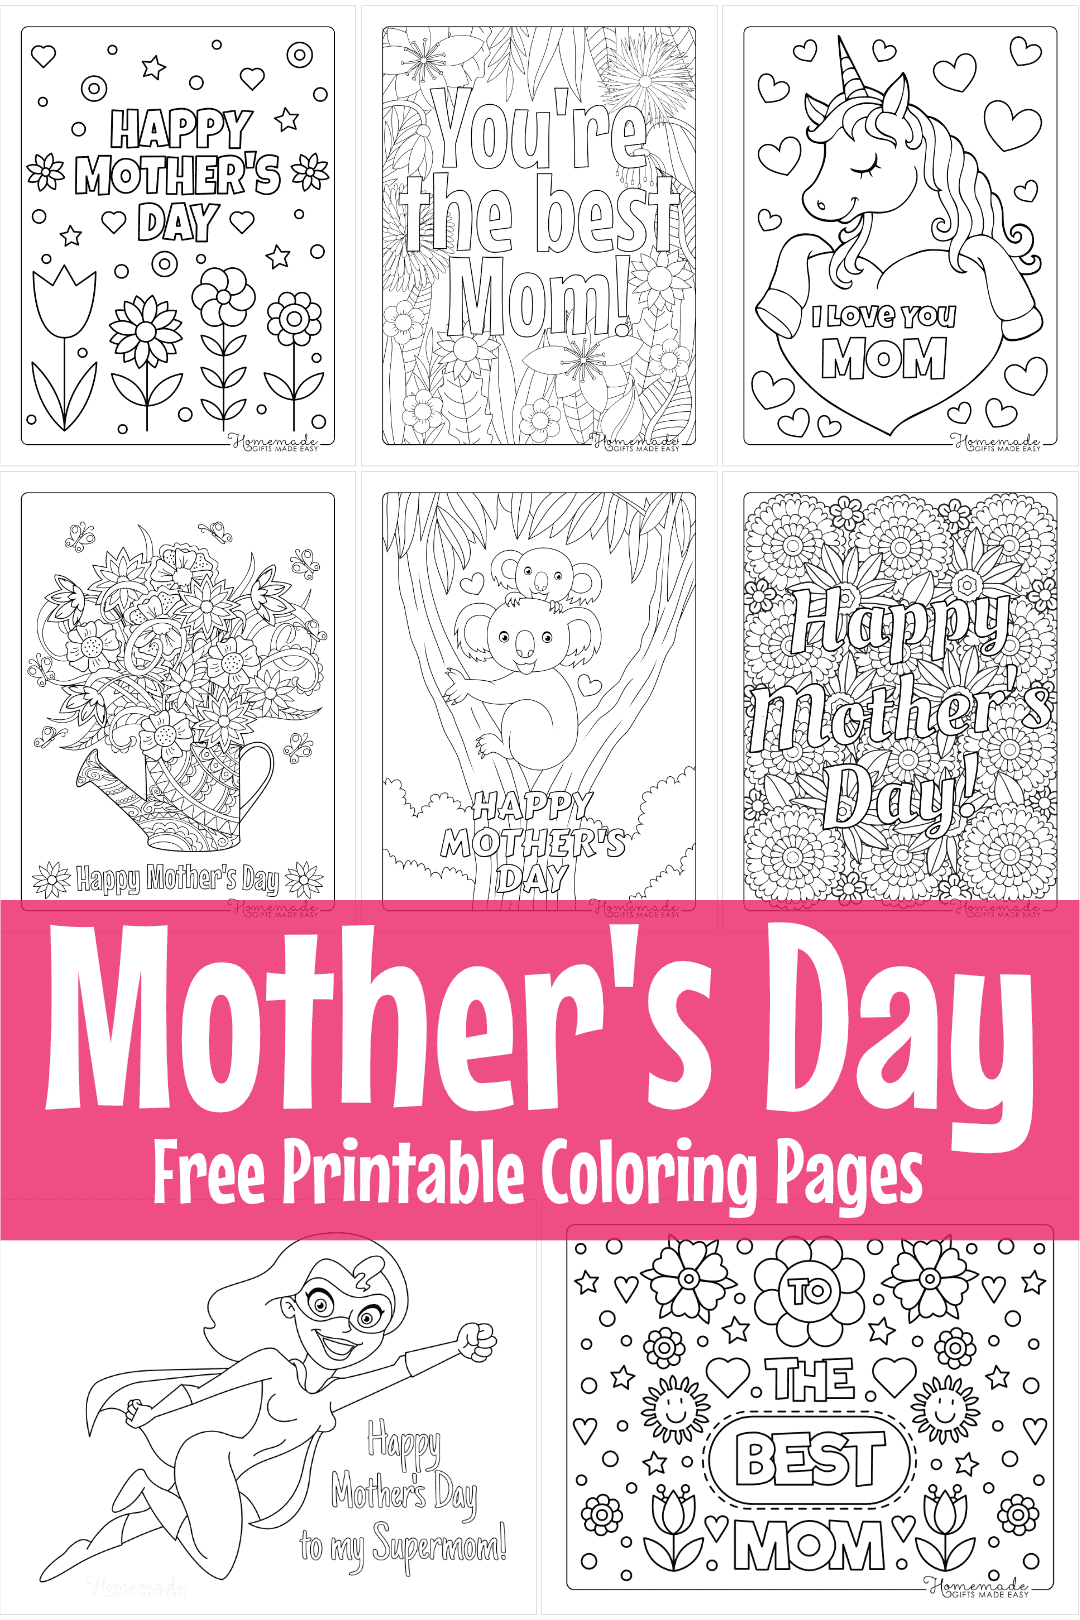 Creative Mother's Day Gifts